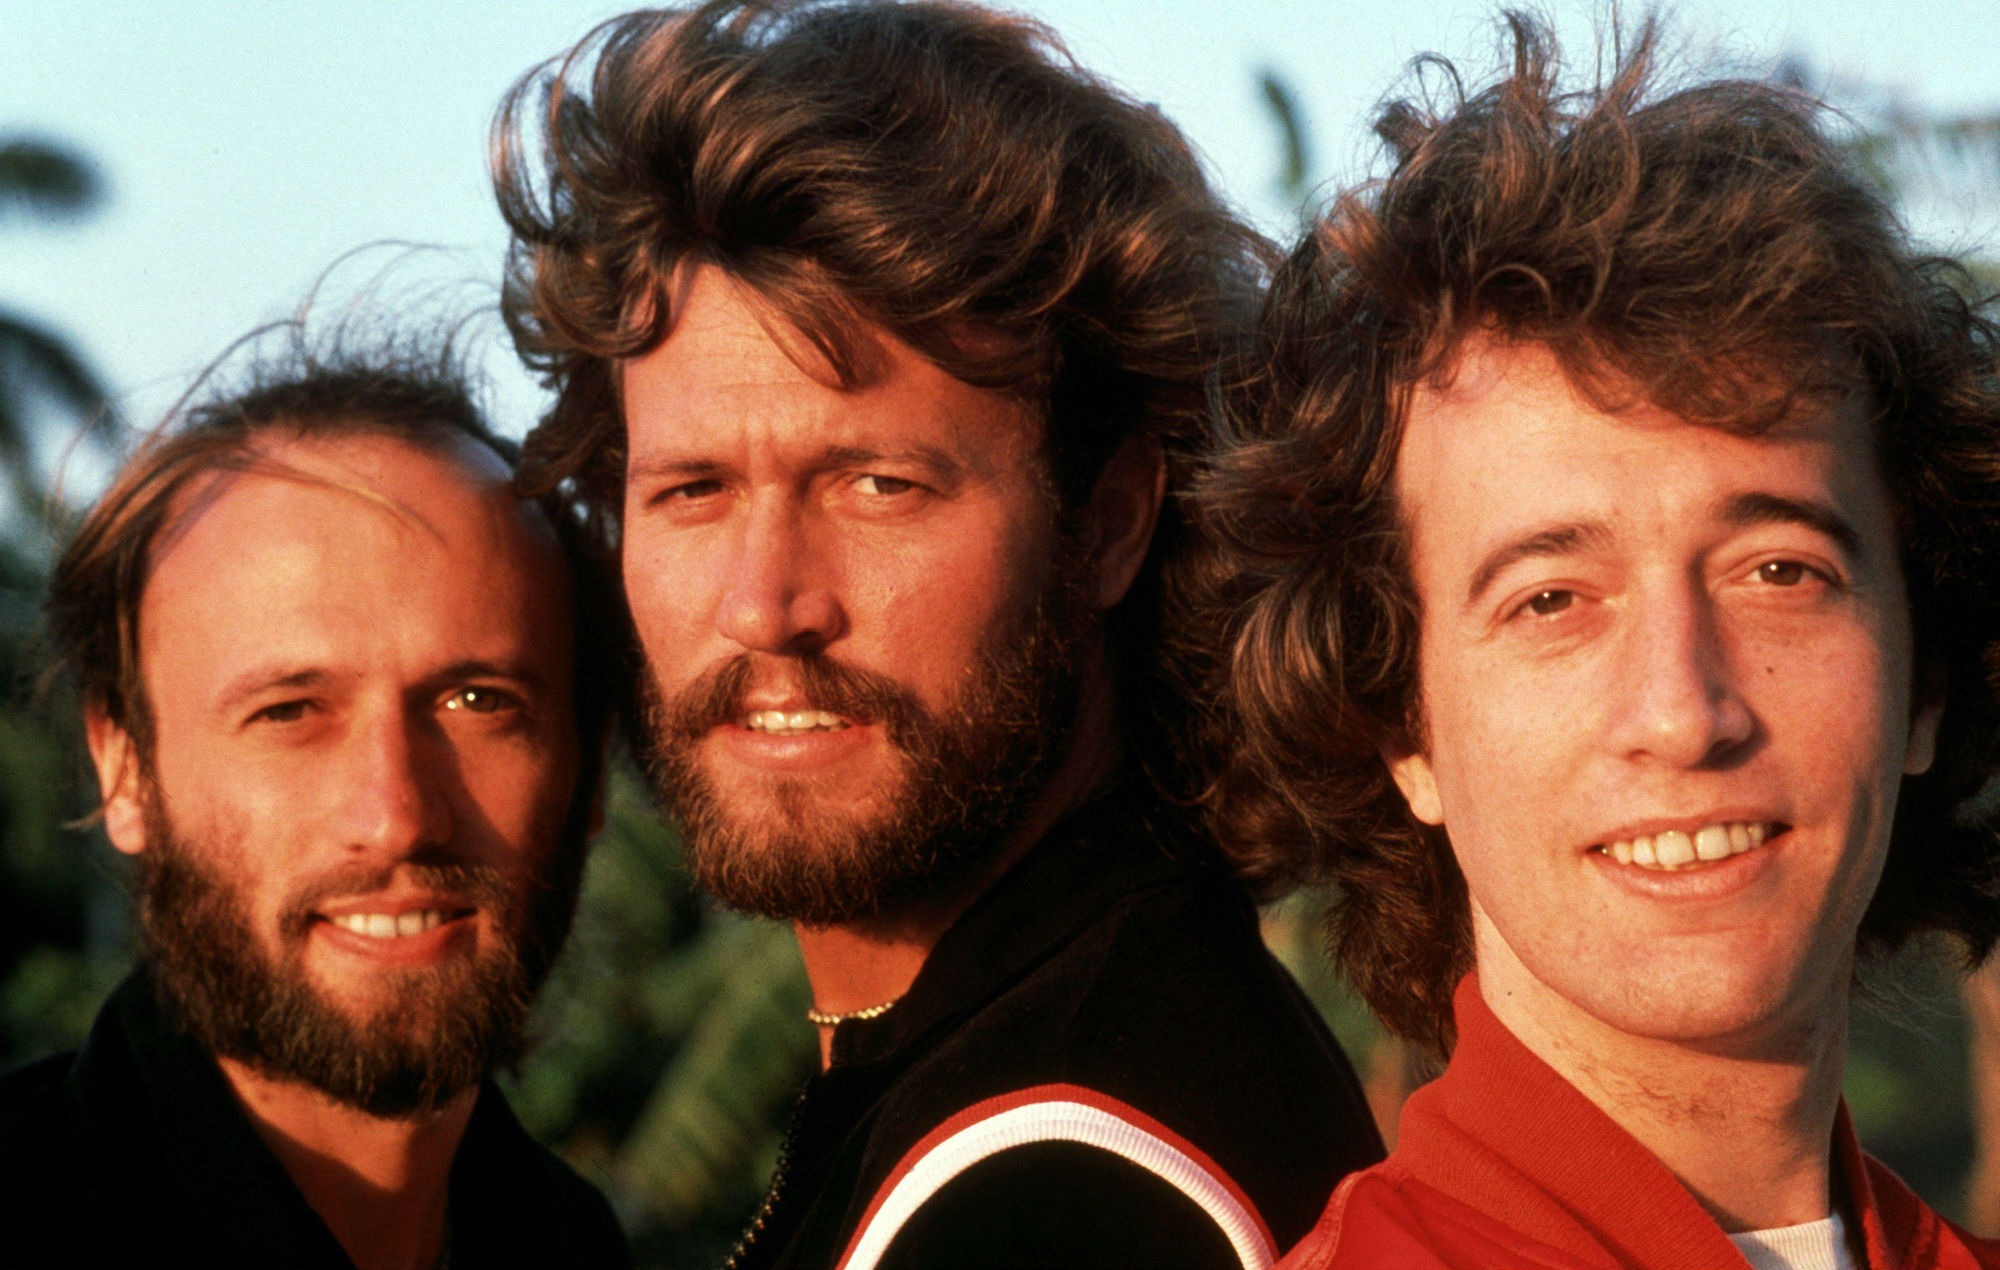 The story behind the new Bee Gees documentary: “Saturday Night Fever changed their lives forever”